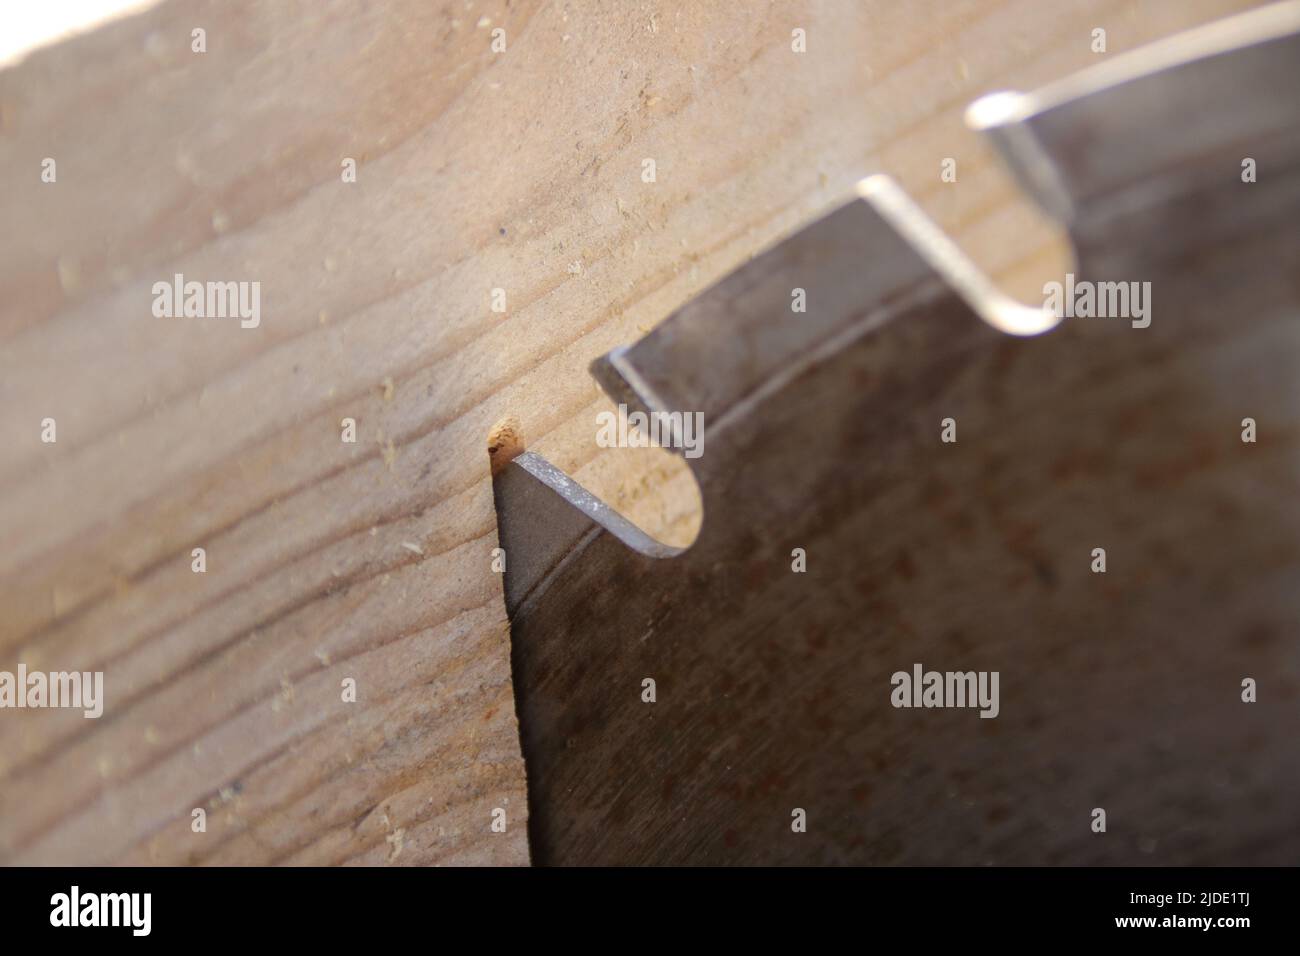 A piece of lumber rests against the saw blade of a circular saw Stock Photo